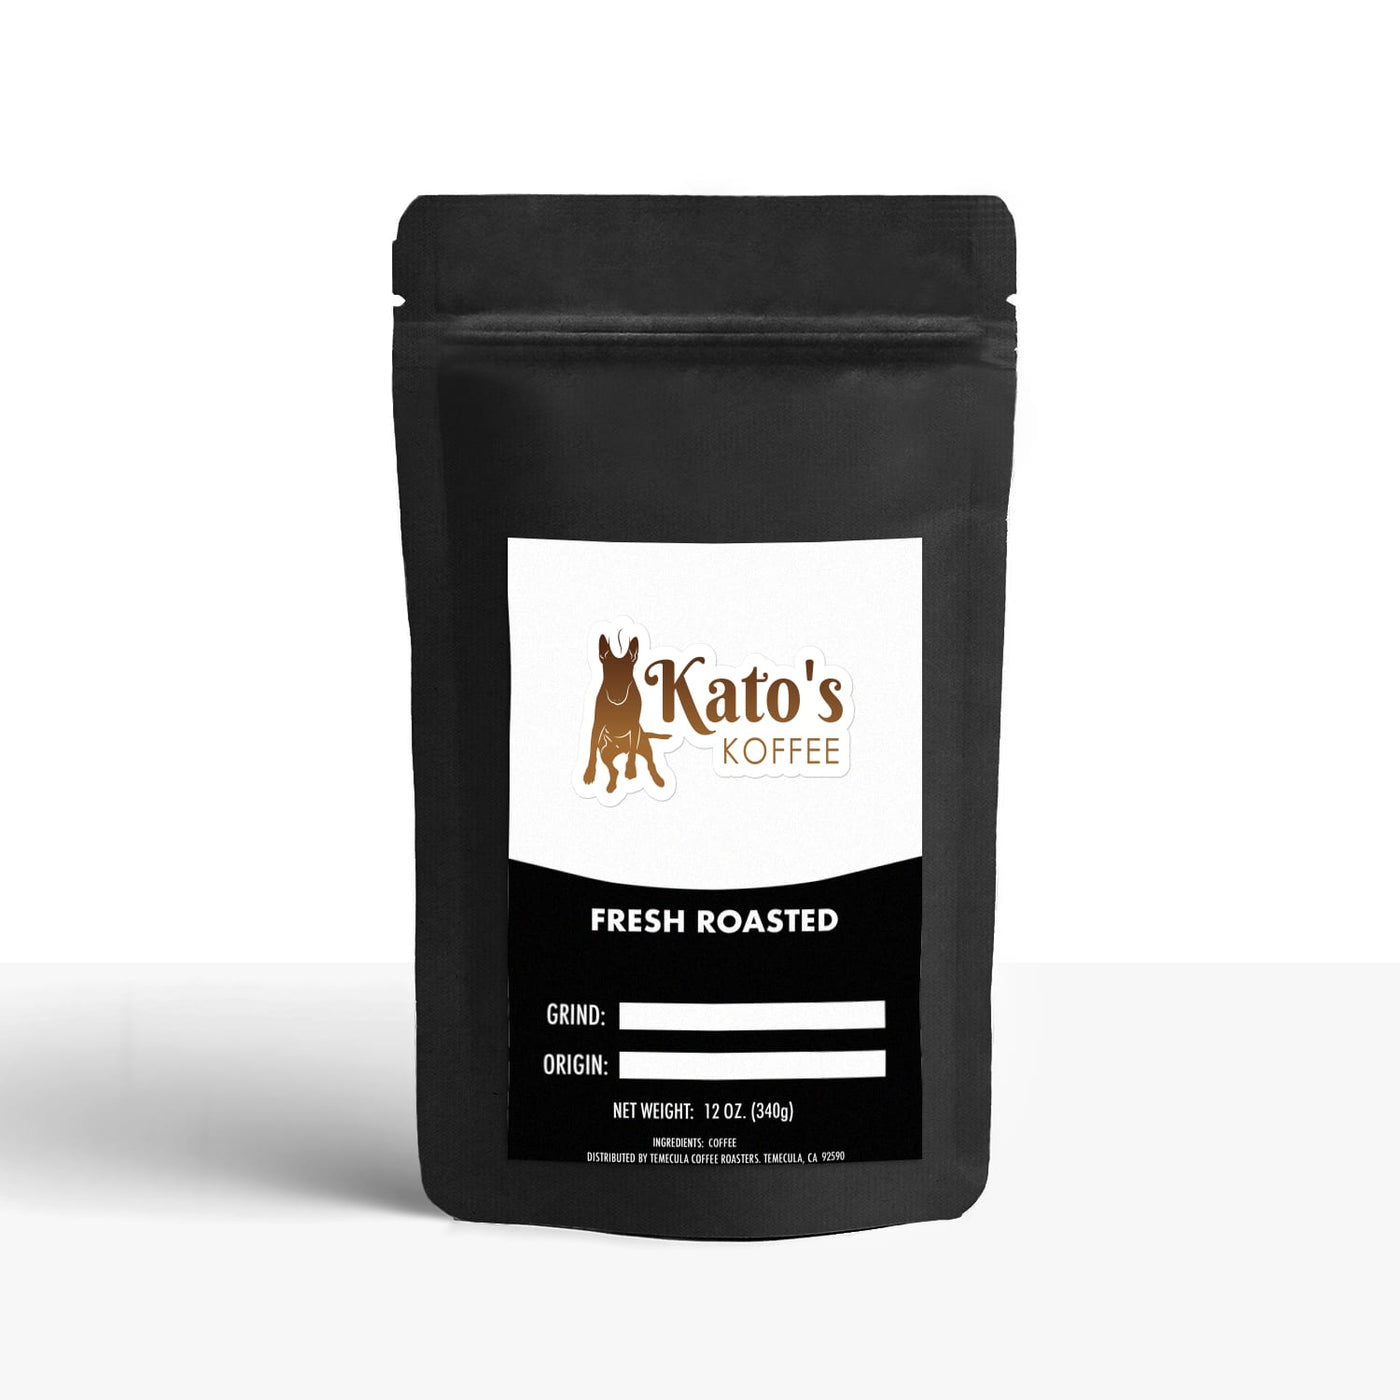 Flavored Coffees Sample Pack (6) - Kato's Koffee